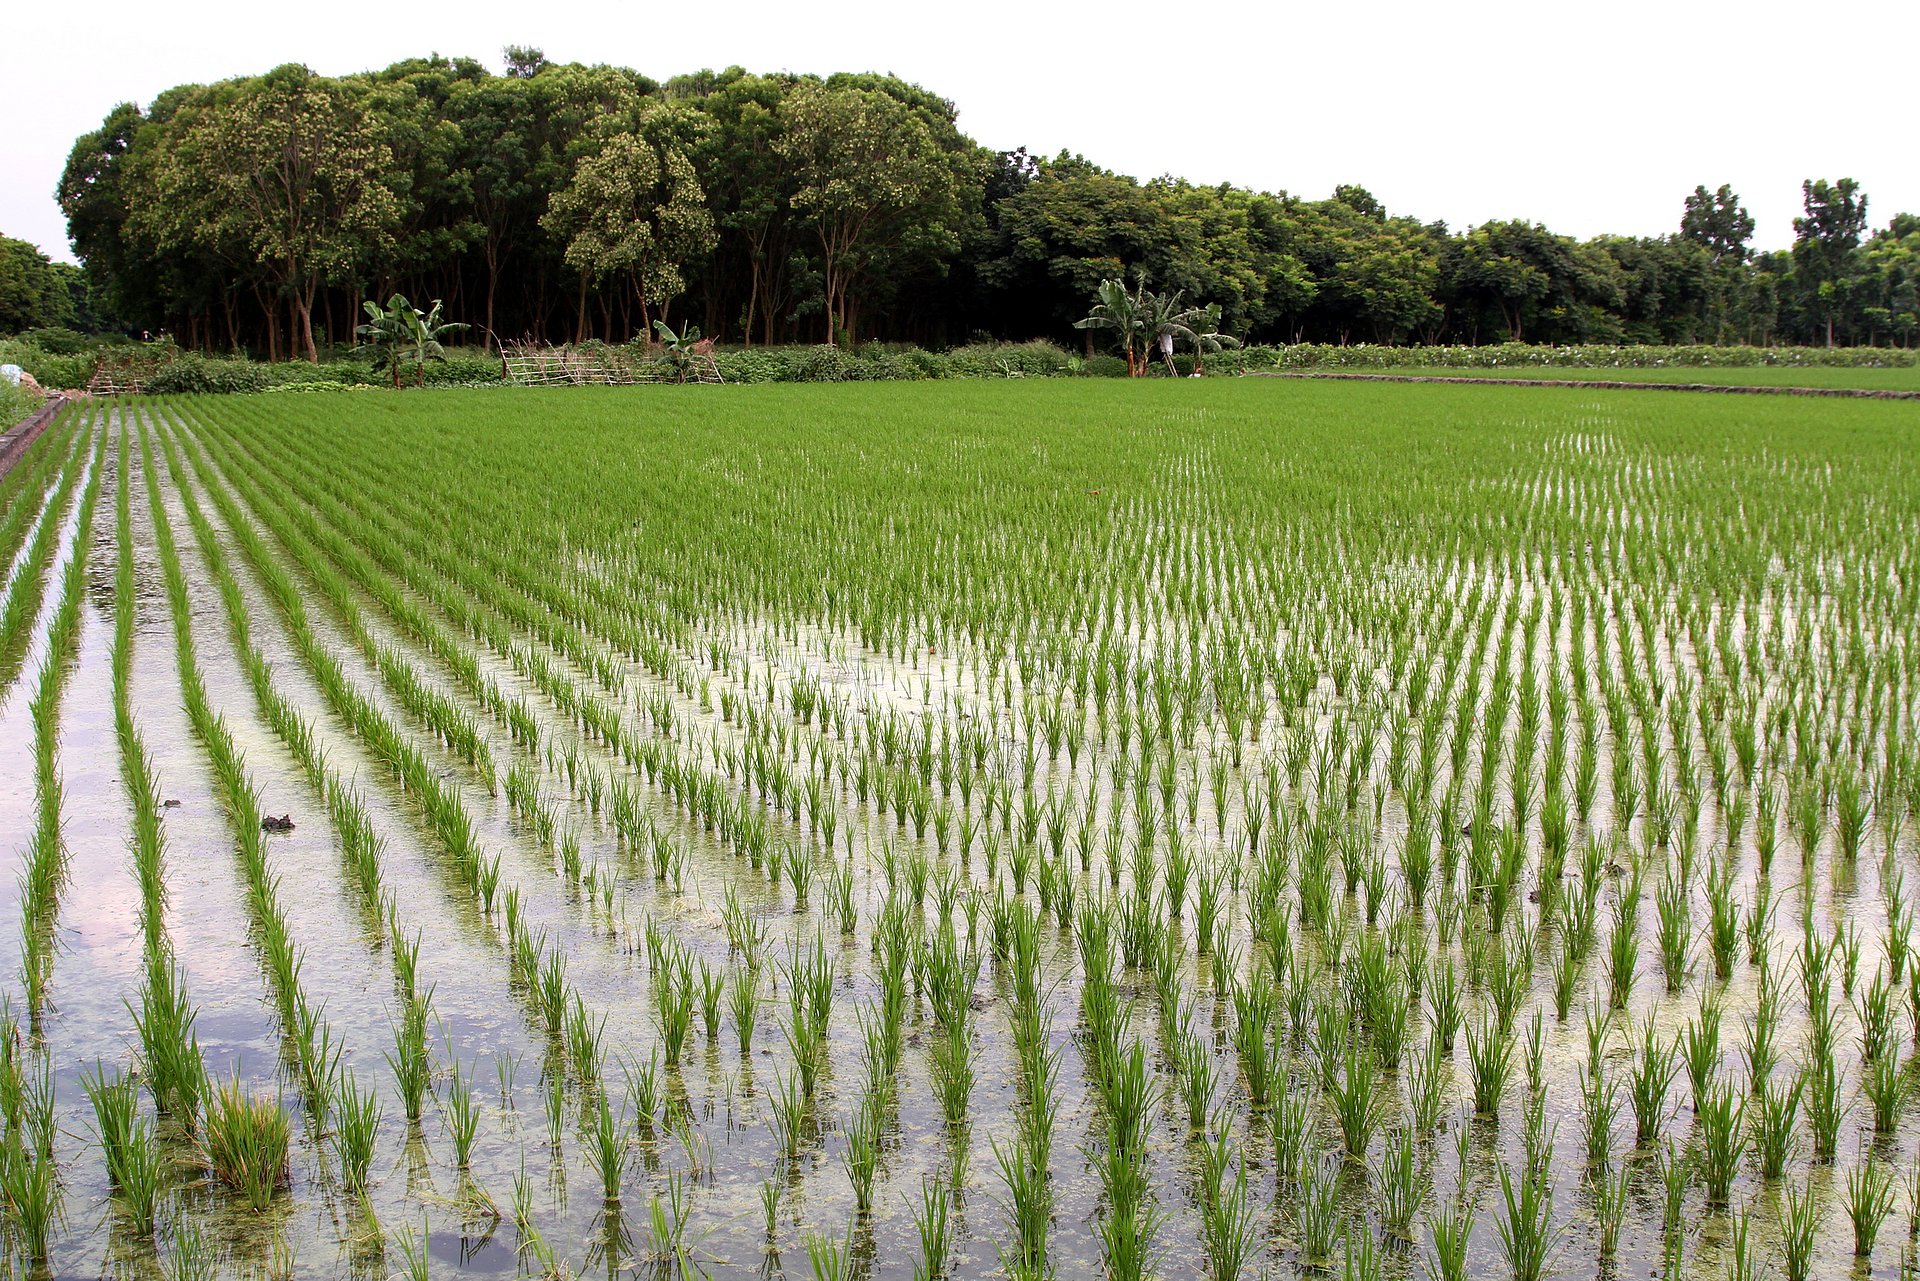 The authors decided to collect their data from rice farmers, because rice is one of the most important staple foods worldwide. (Foto: Fotolia/ ivychuang1101)